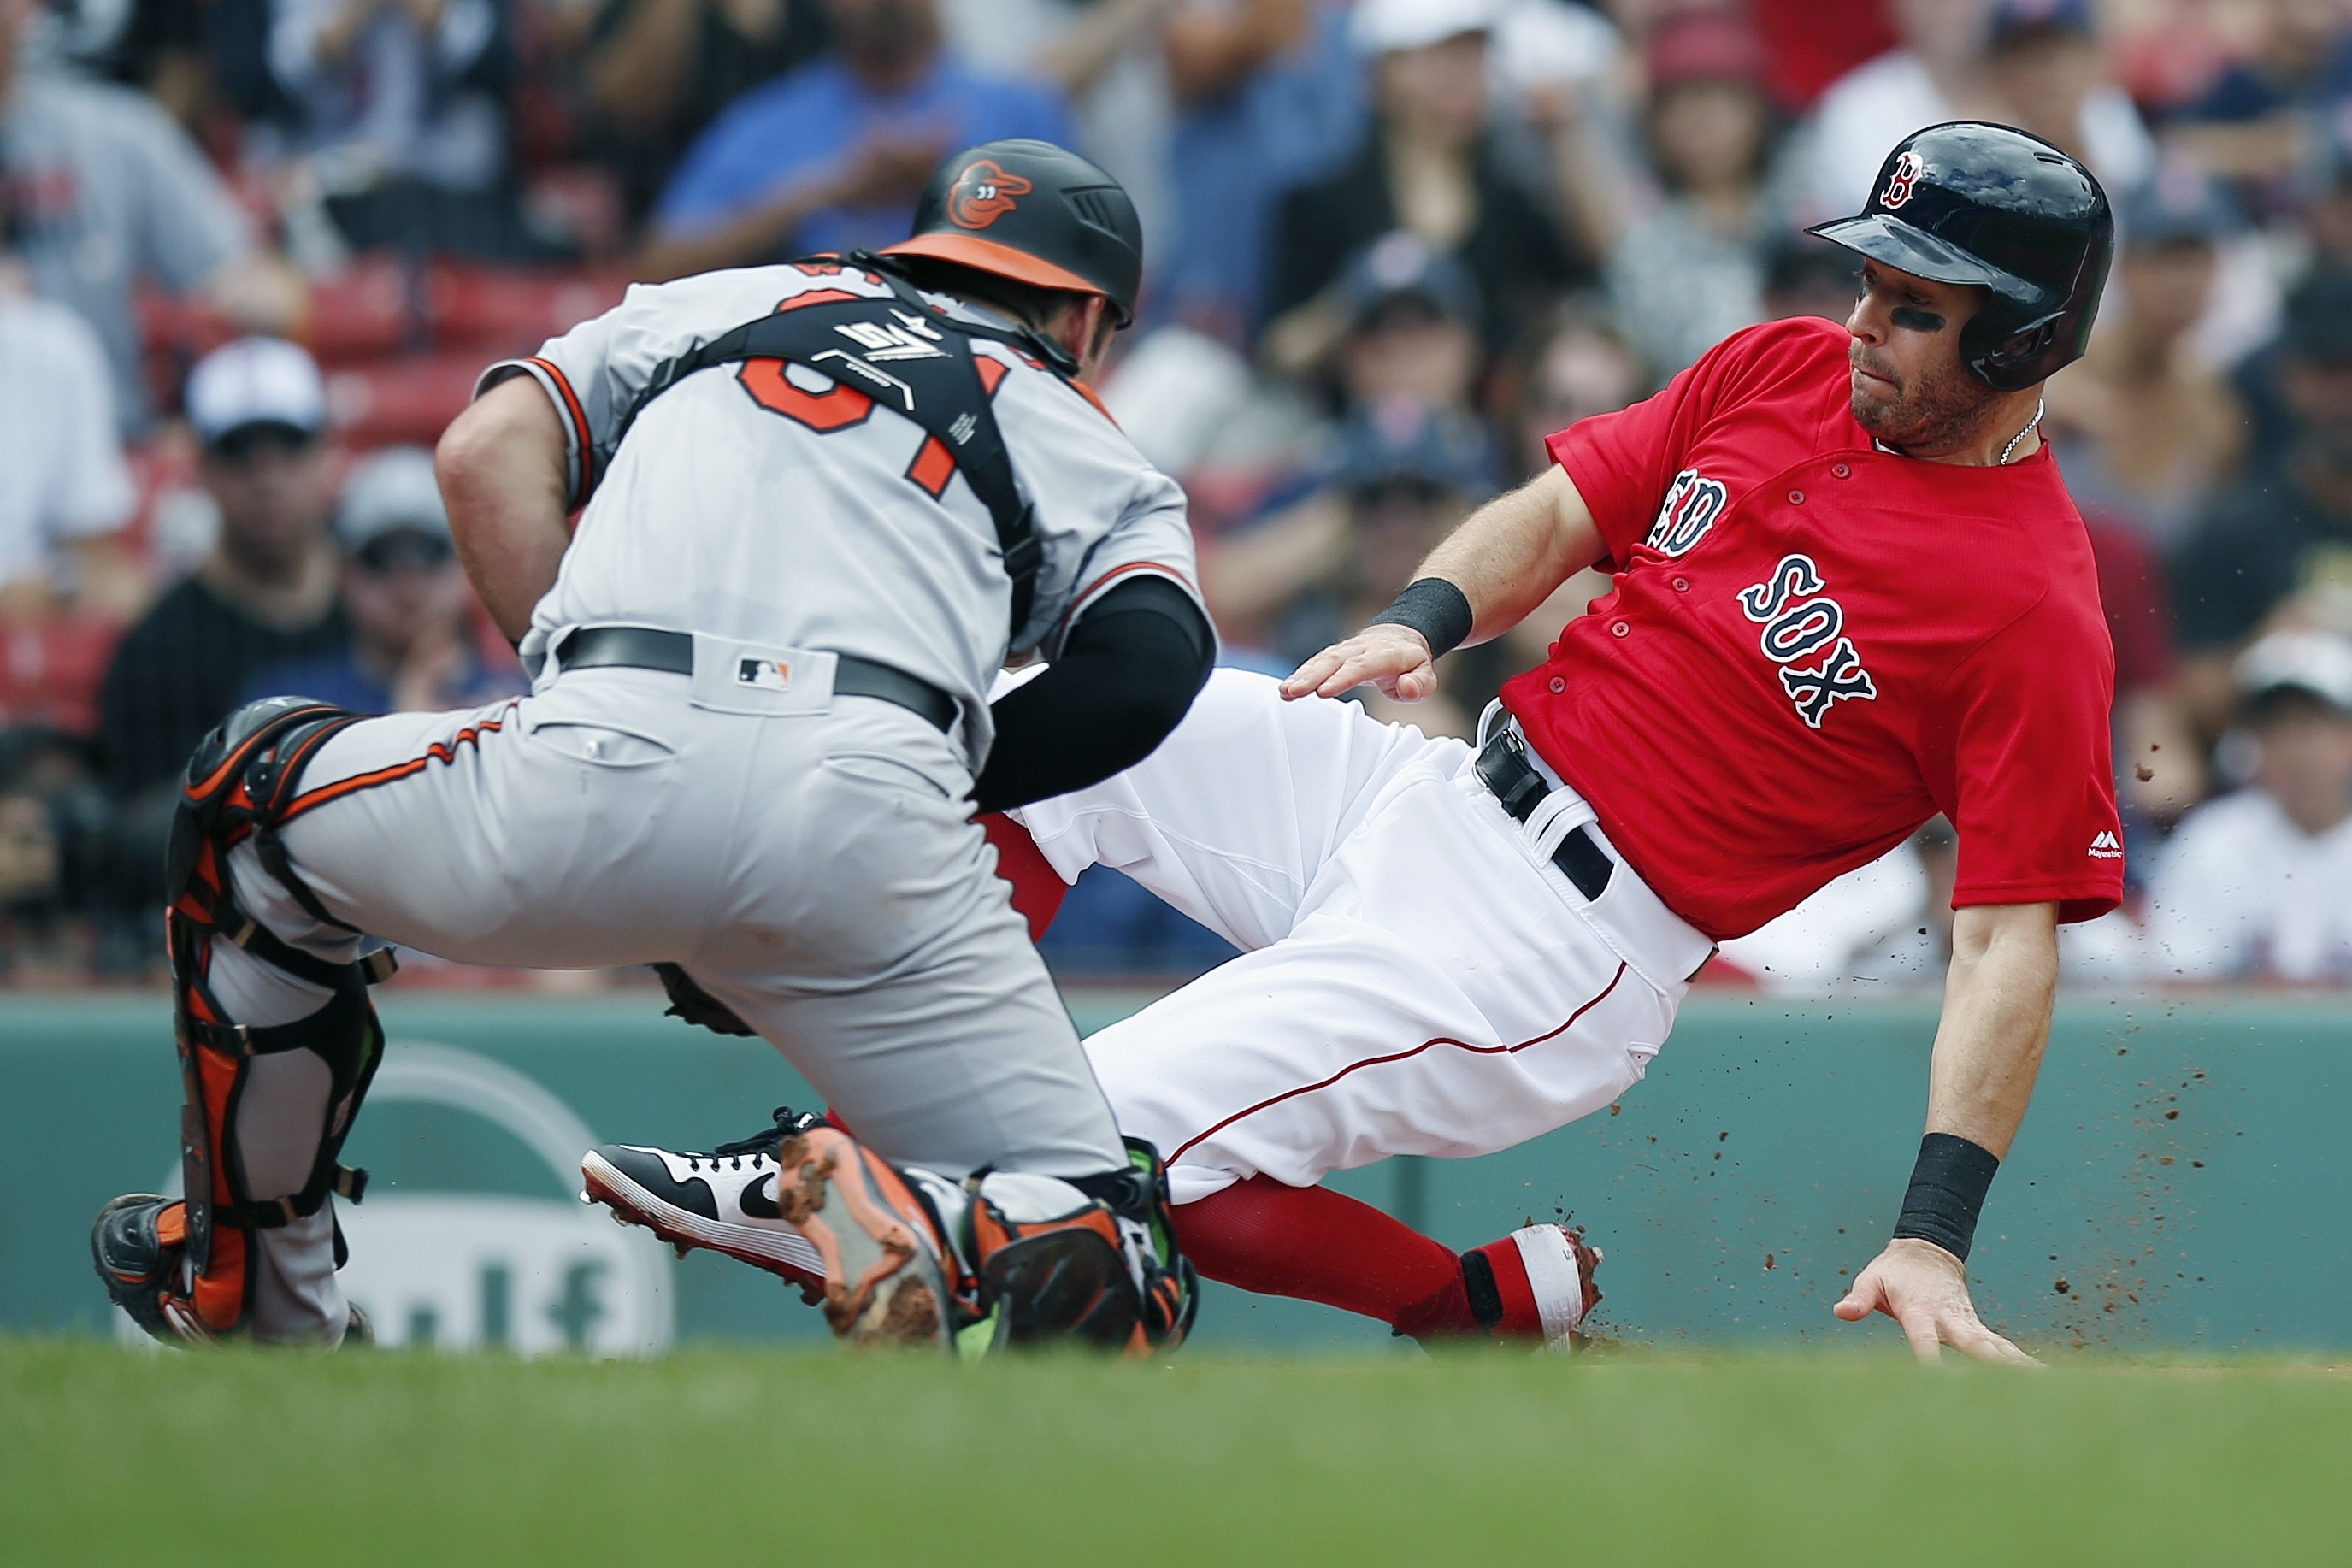 Red Sox send Orioles to record-112th loss, 19-3